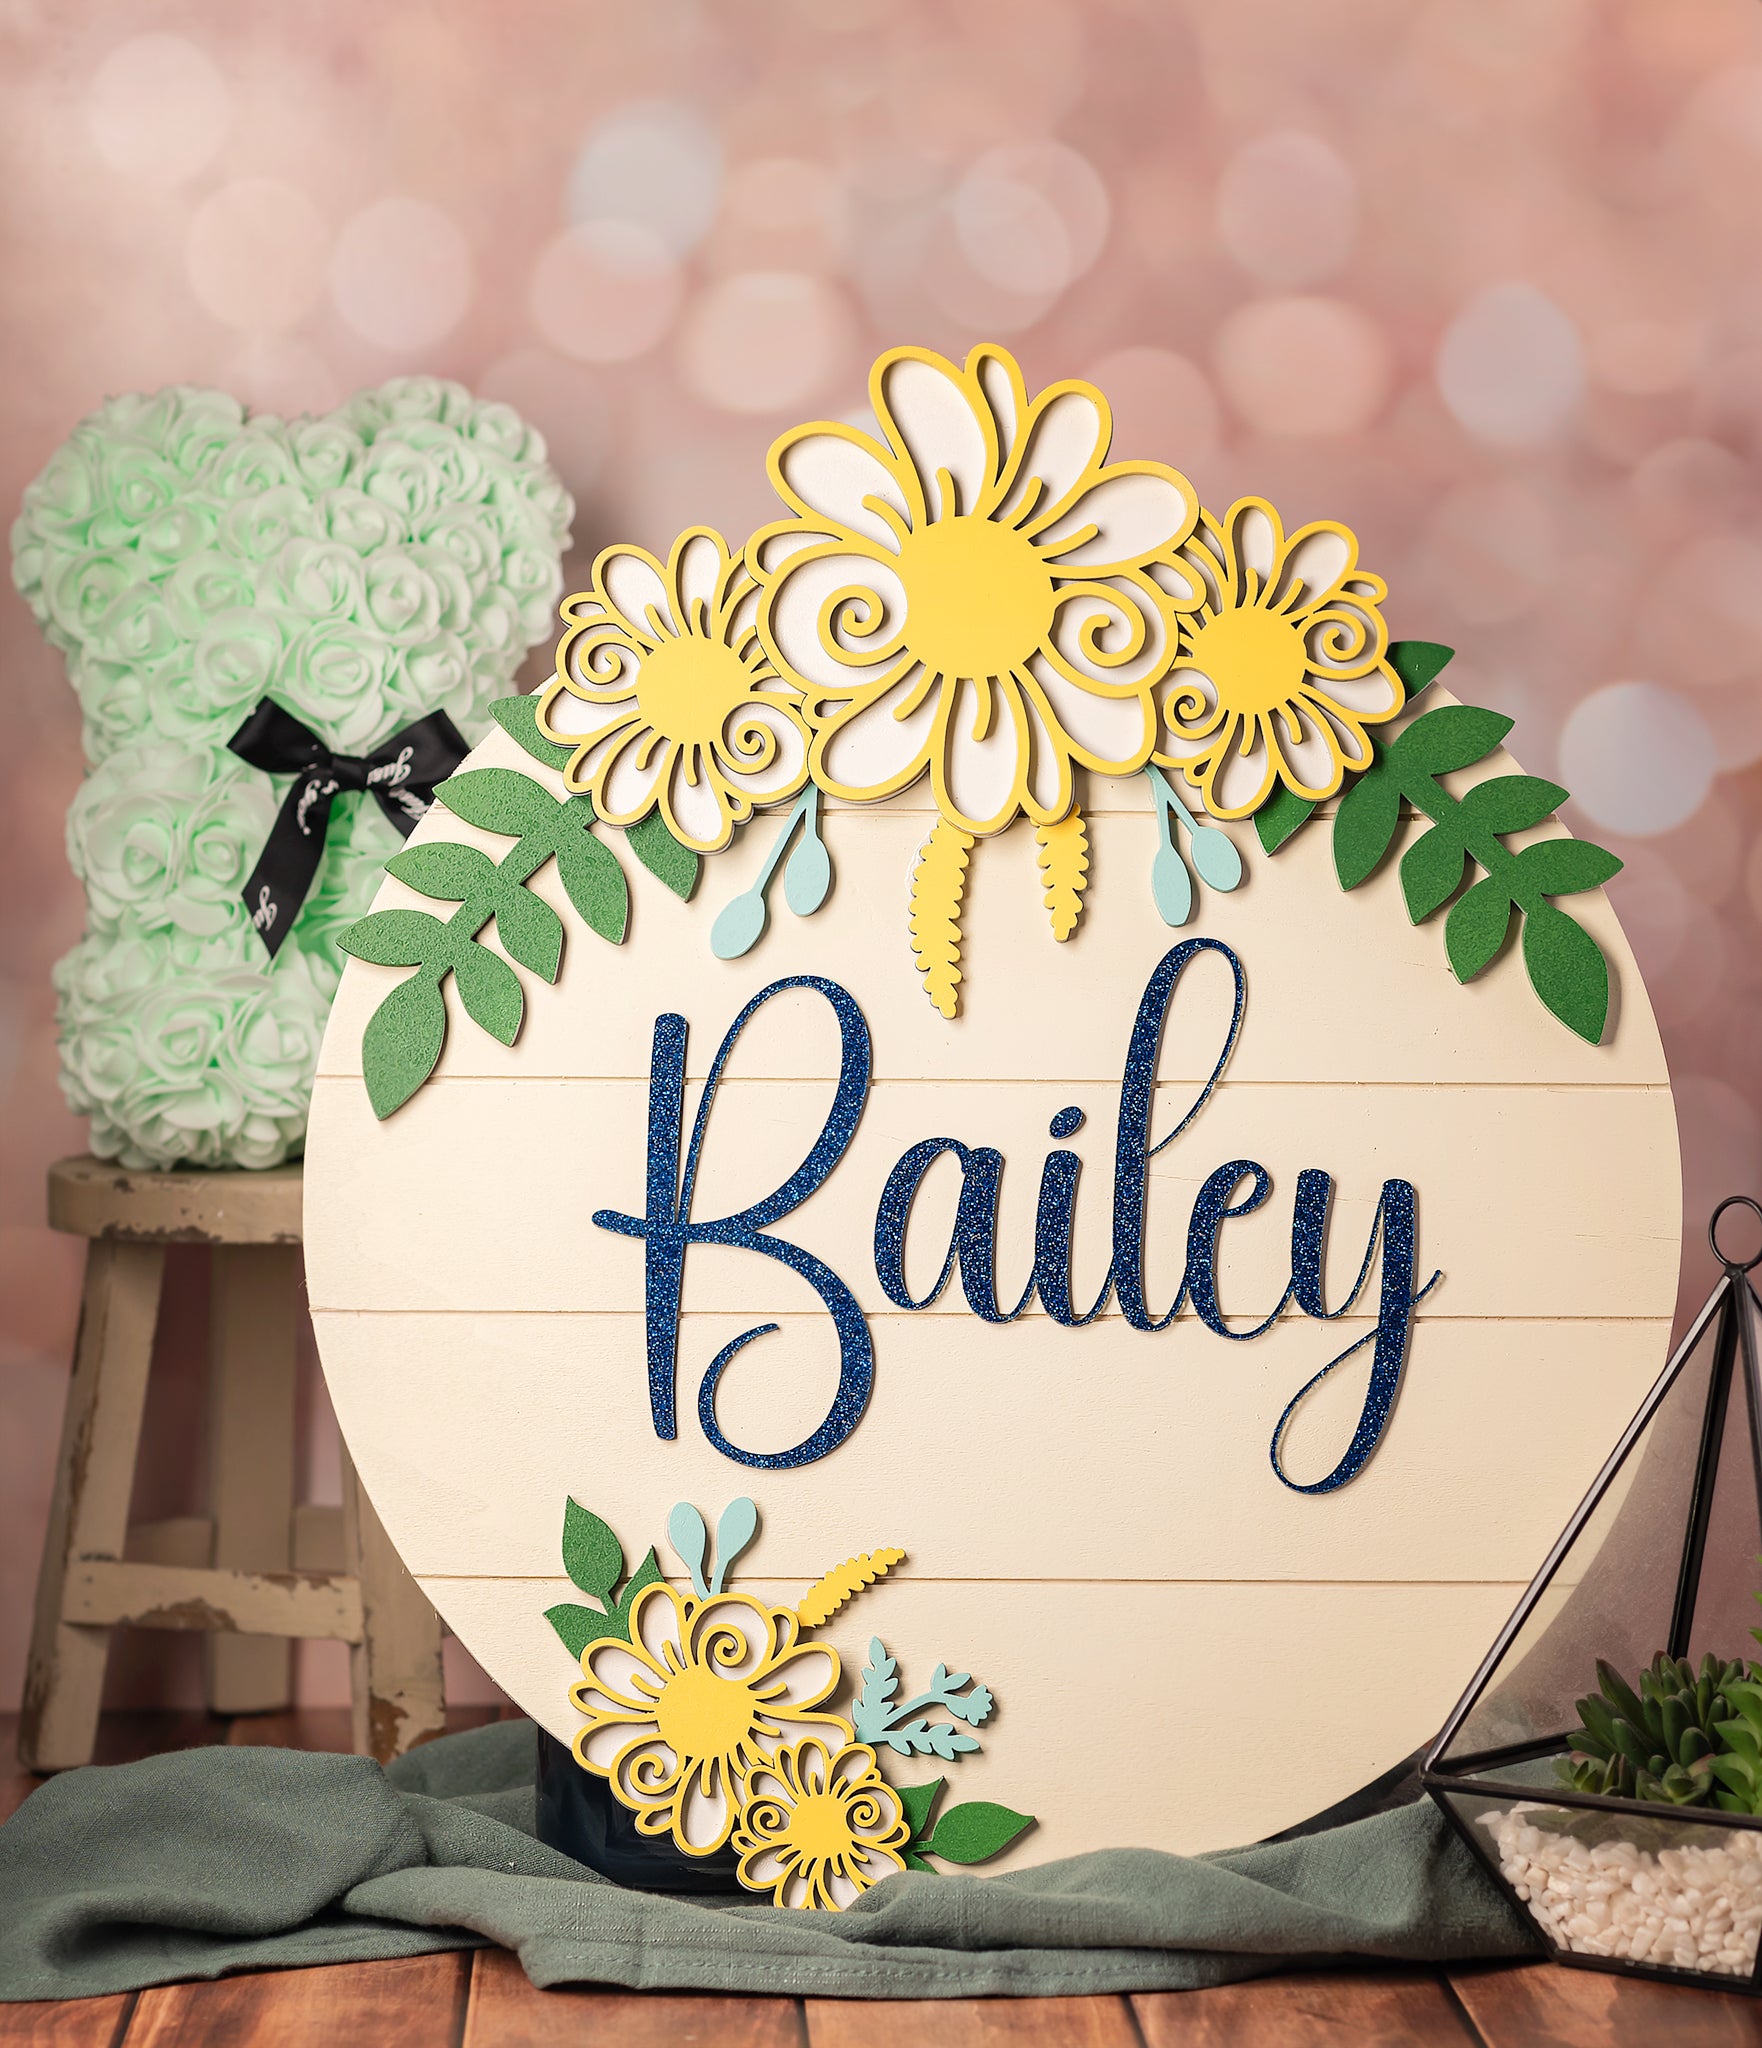 Floral nursery sign, Personalized wood round, Kids room decor, New parents gift, Laser-cut daisy design, Shiplap nursery art, Custom name plaque